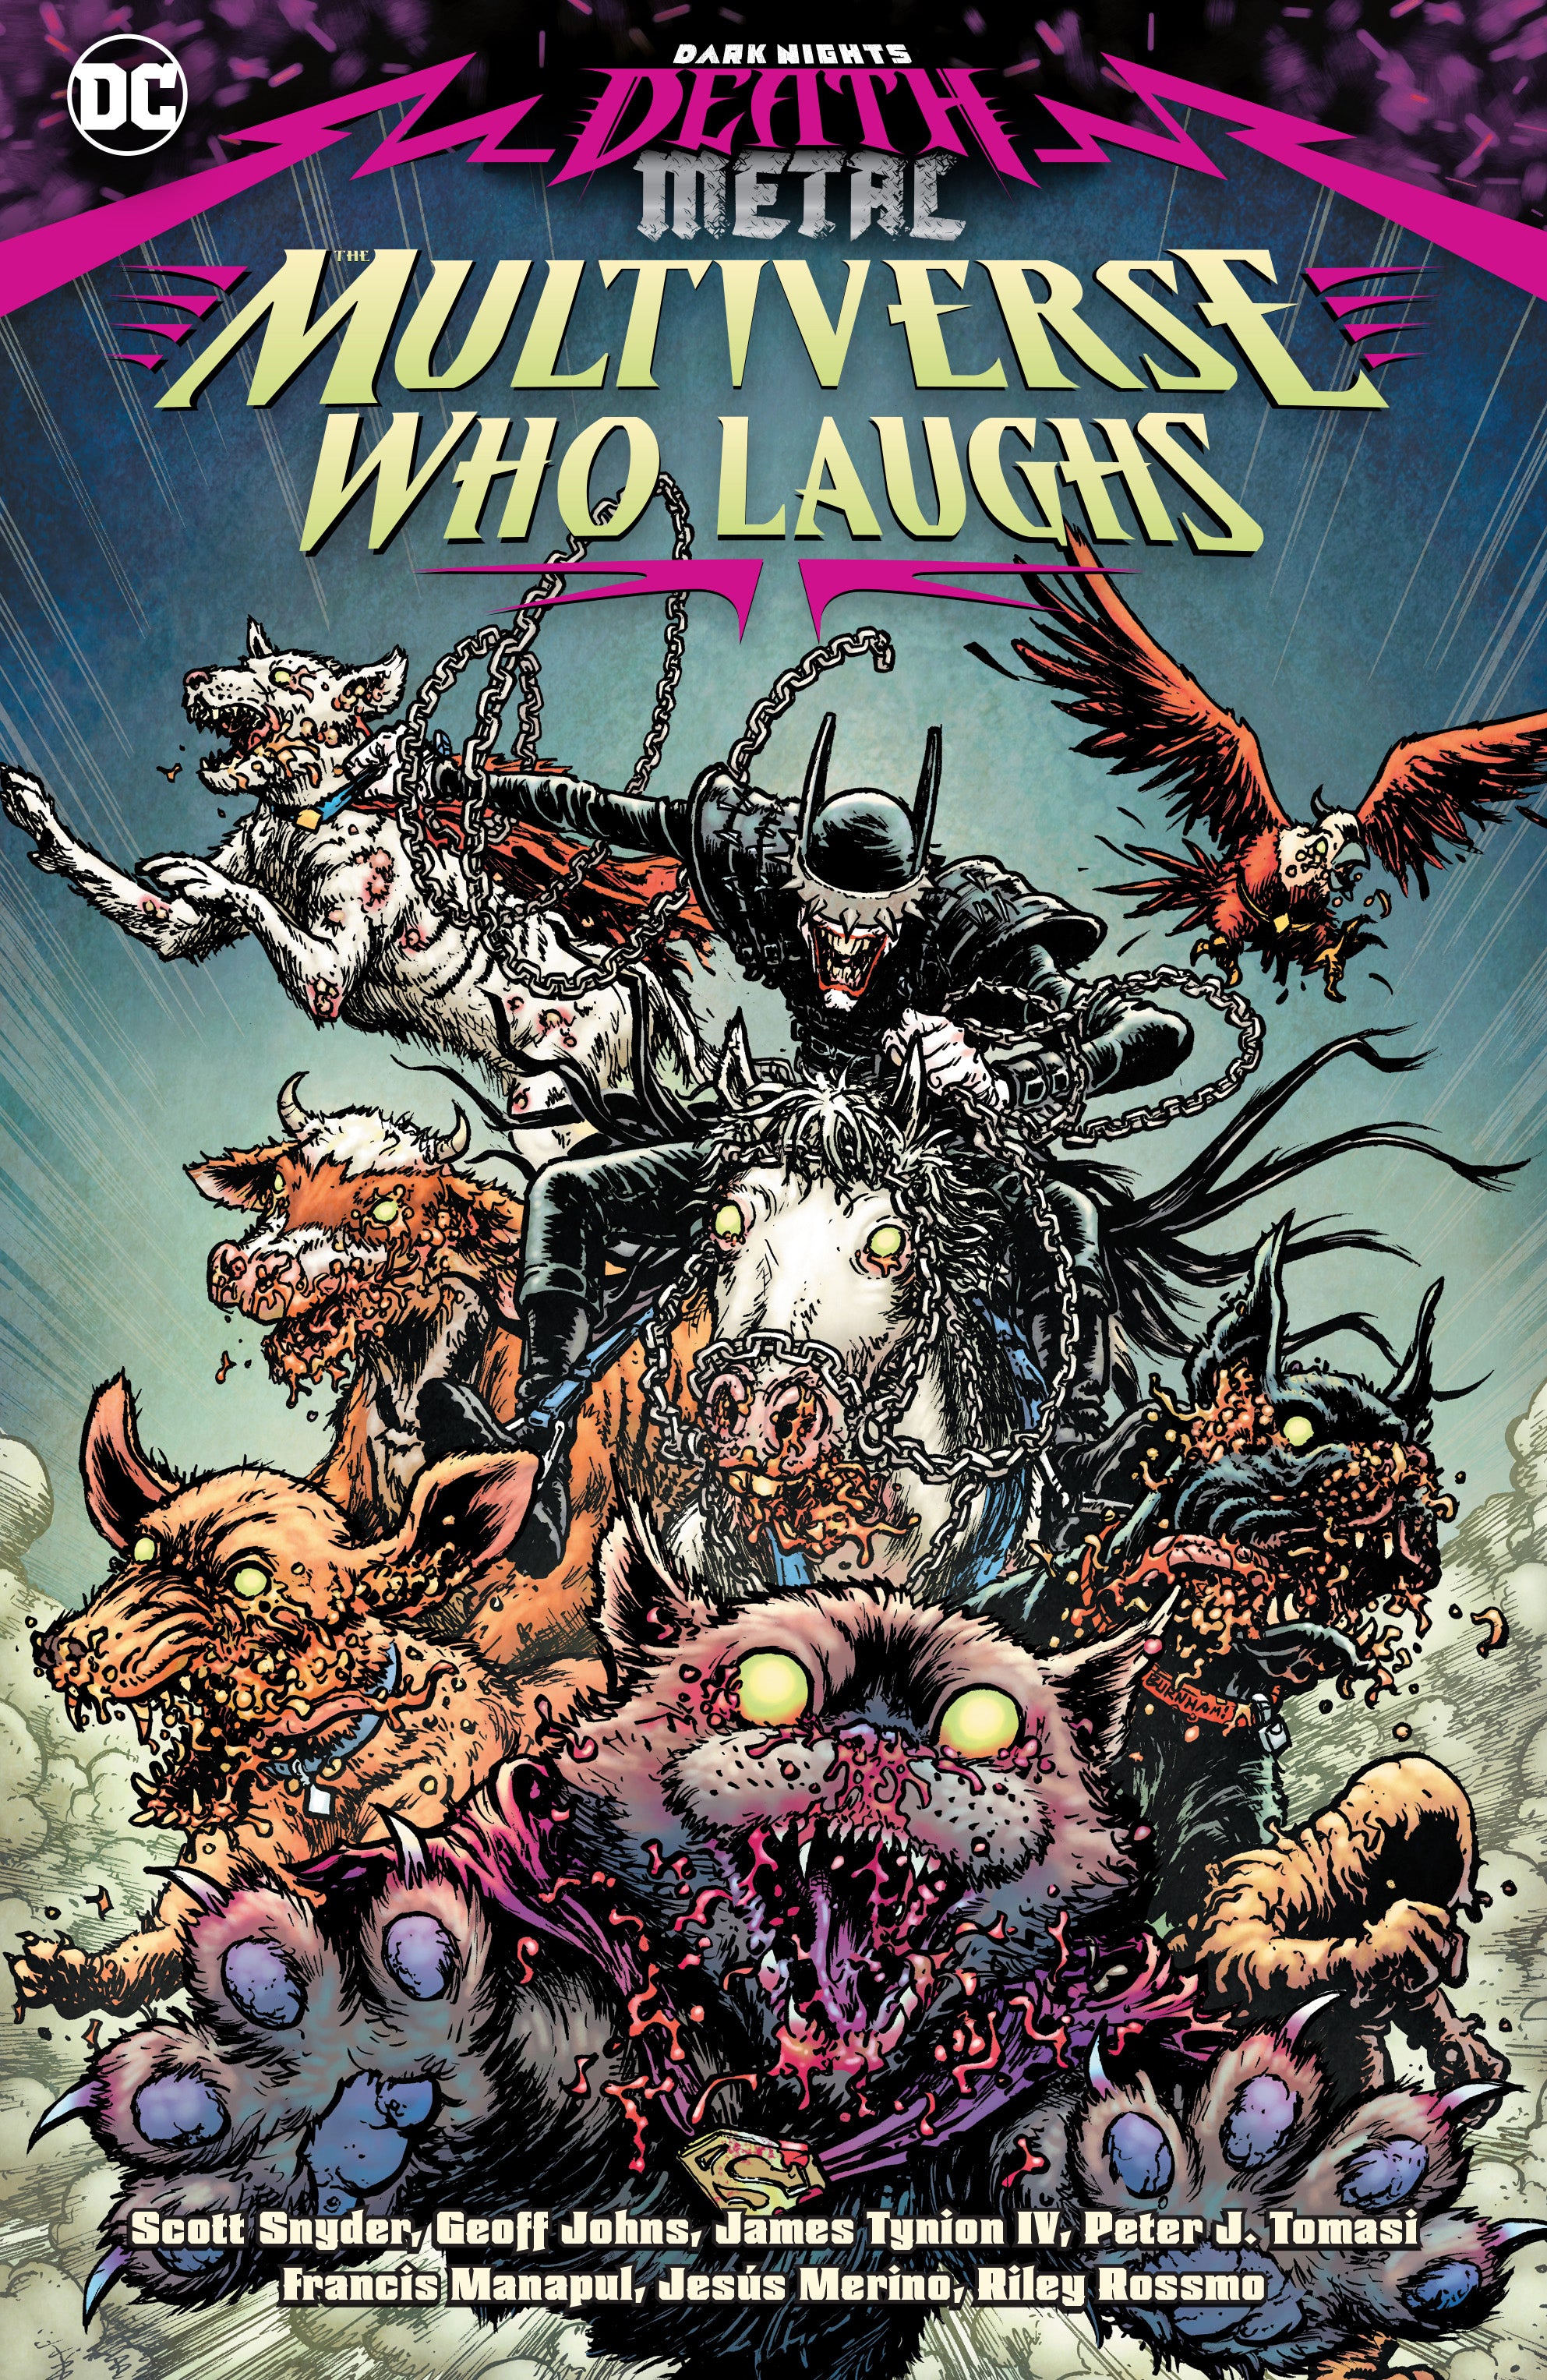 DARK NIGHTS DEATH METAL THE MULTIVERSE WHO LAUGHS TRADE PAPERBACK